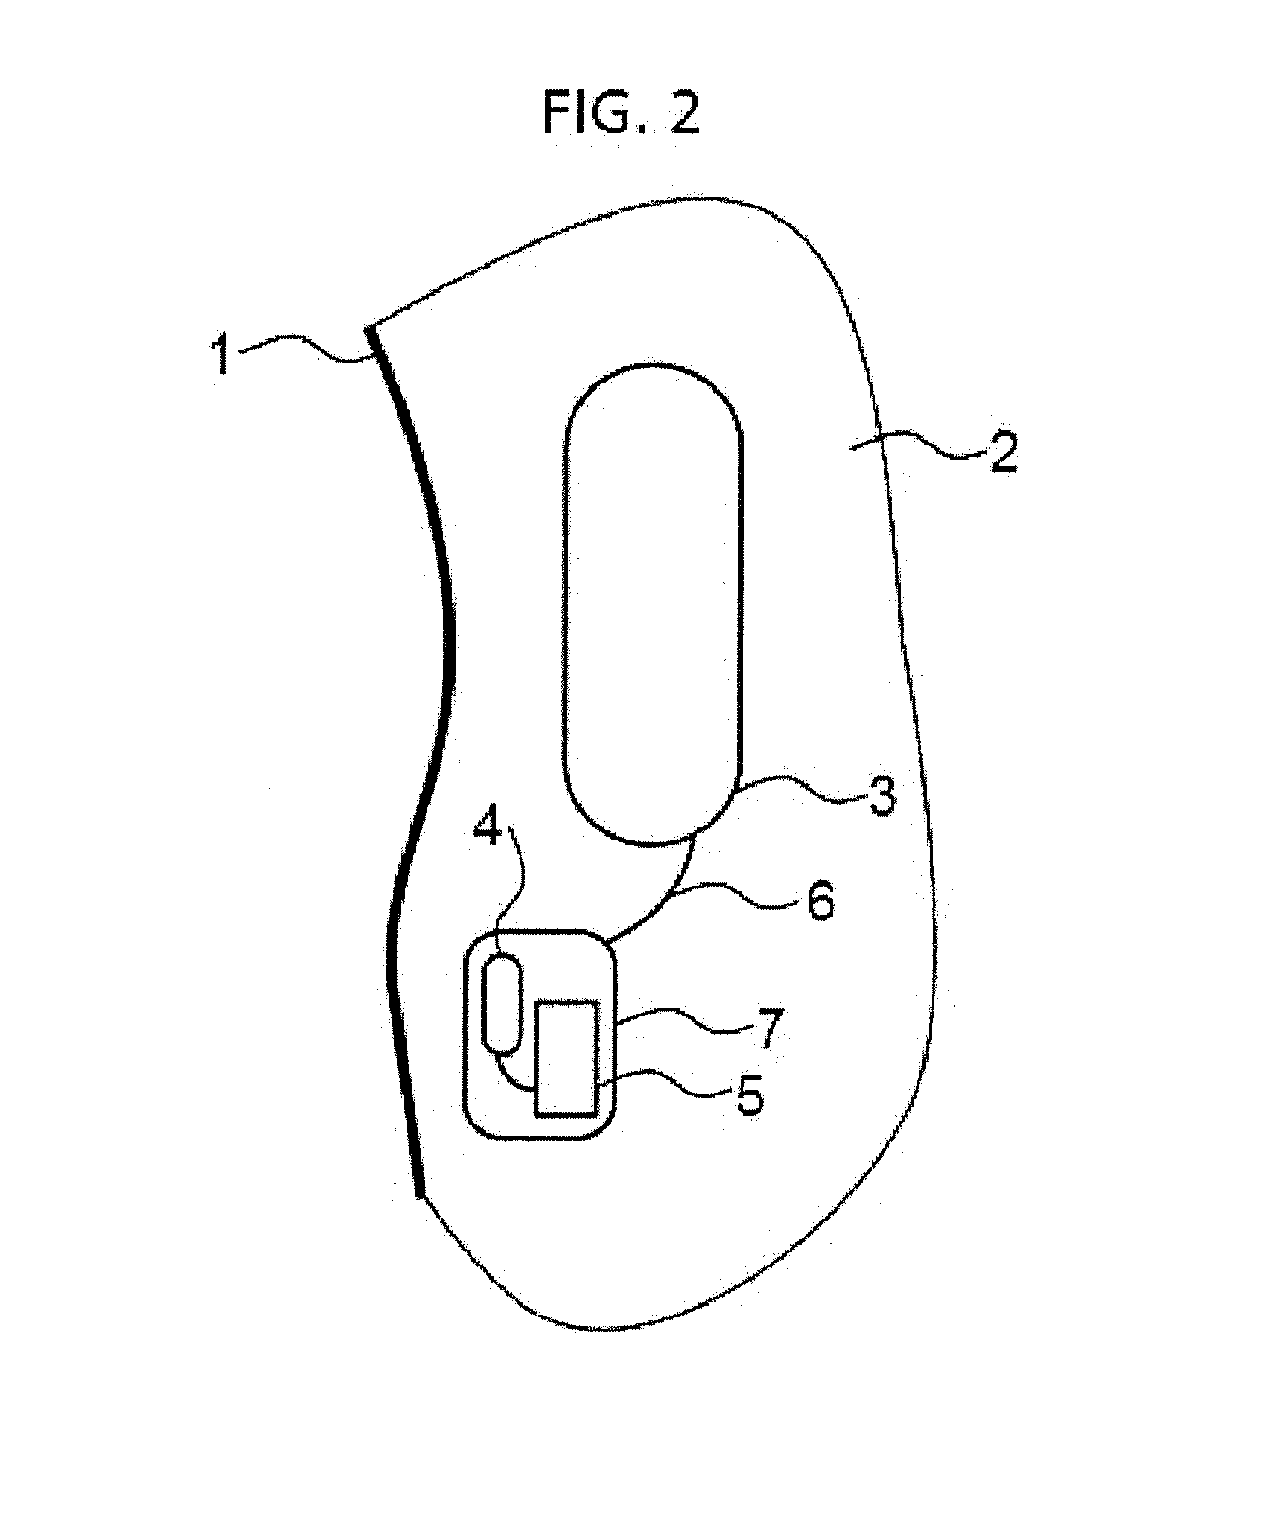 System for controlling an implantable device on the basis of commands issued by a user